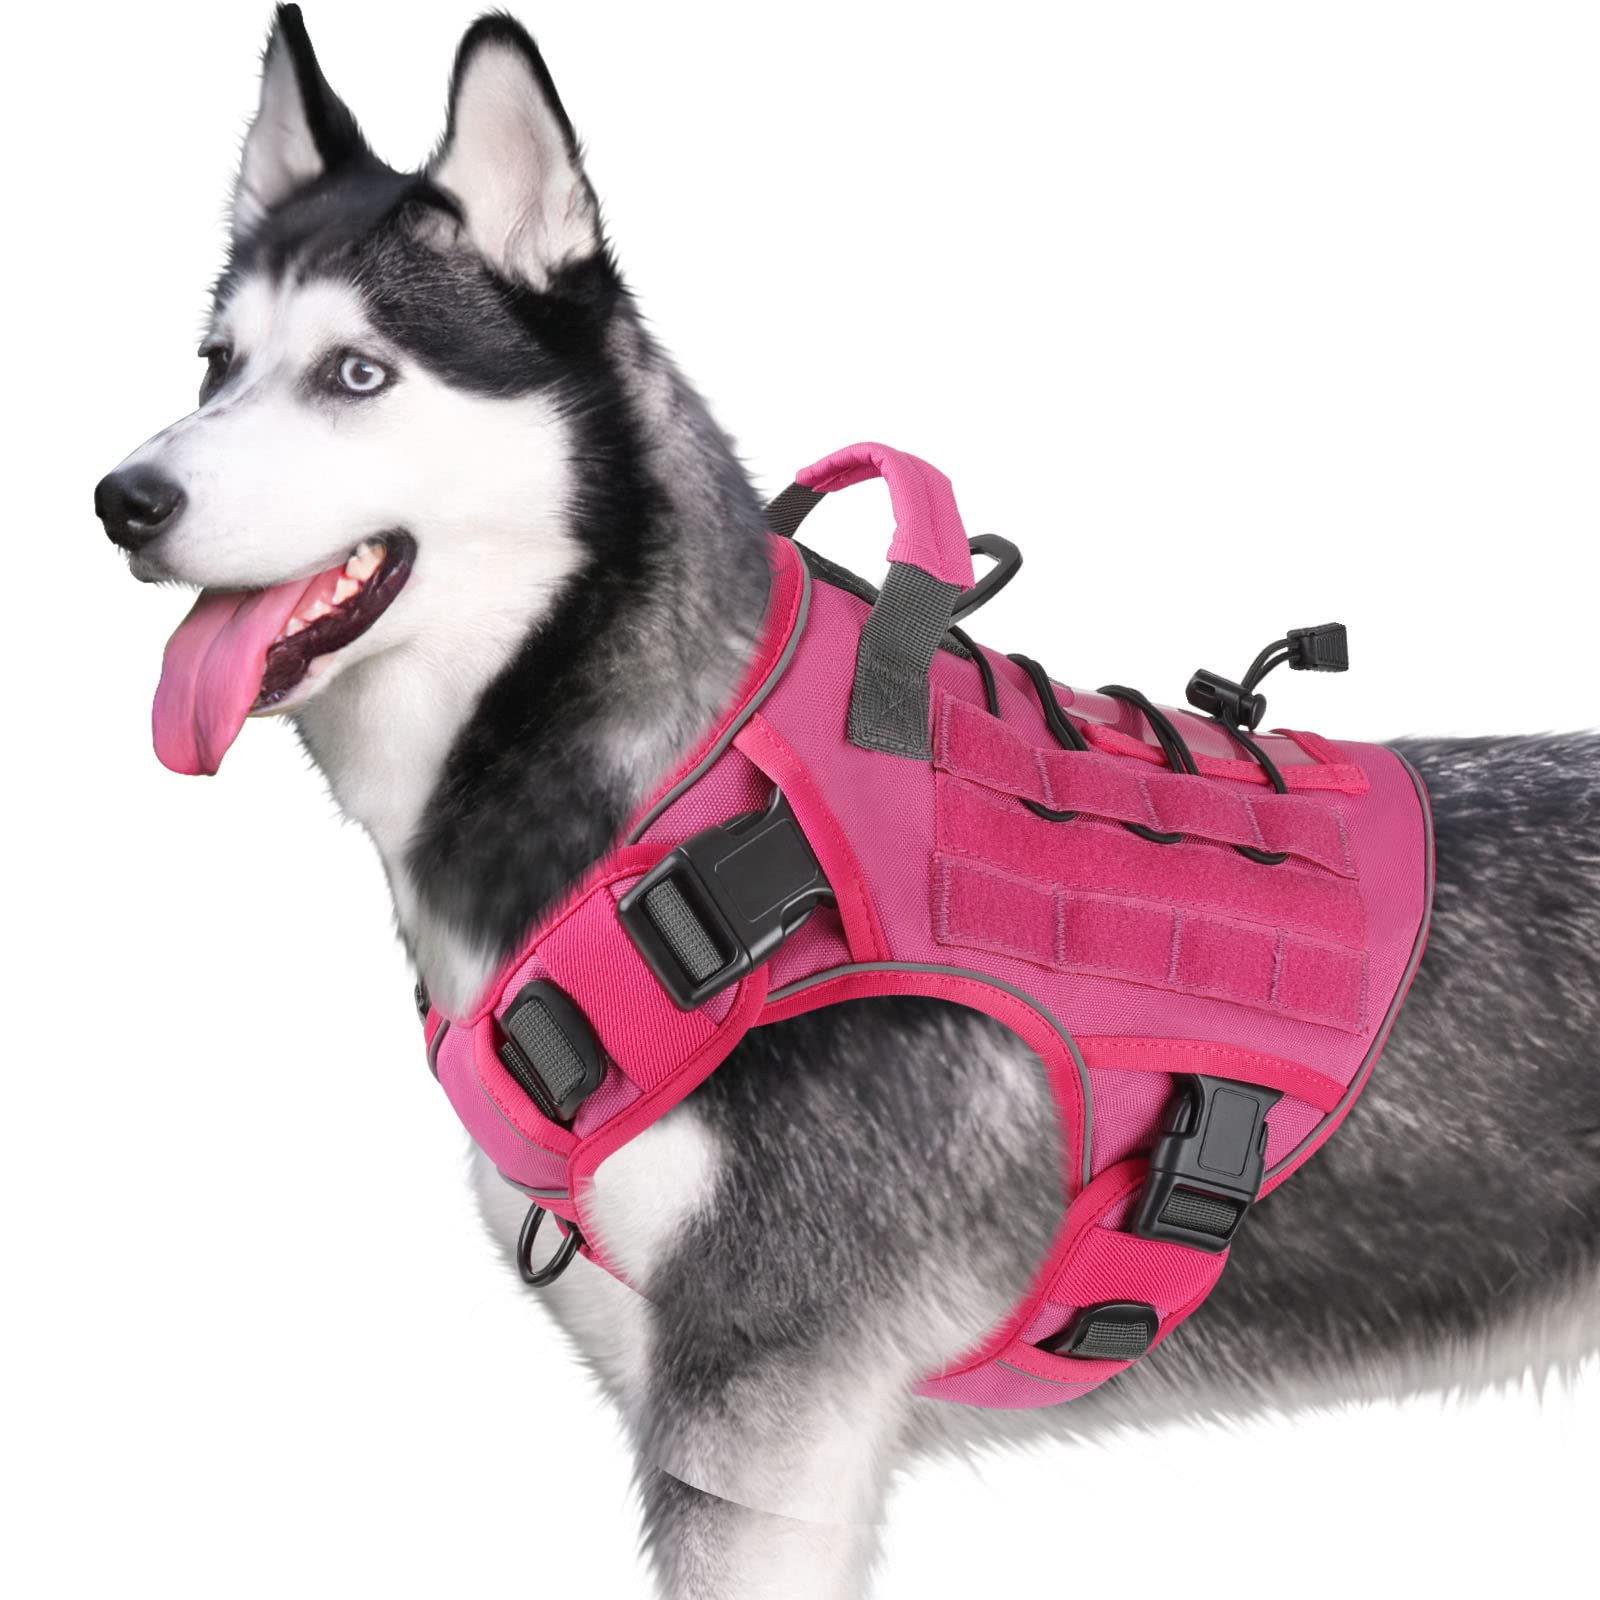 WINGOIN Pink Tactical Dog Harness Vest for Small Dogs No Pull Adjustable Reflective K9 Military Dog Service Dog Harnesses with H